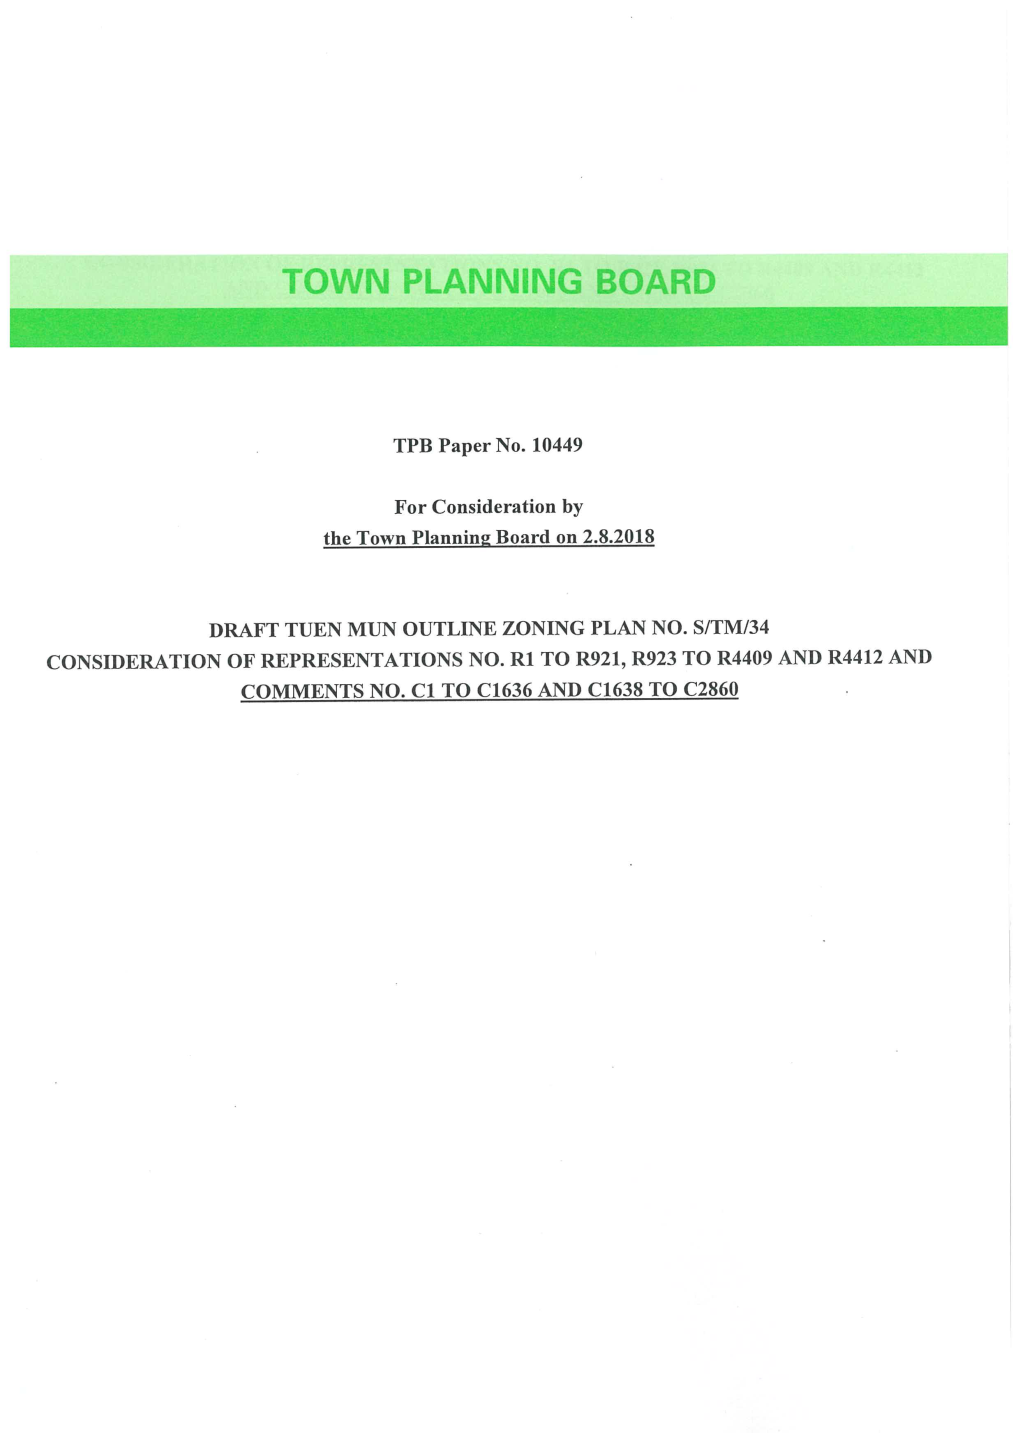 Town Planning Board Paper No. 10449